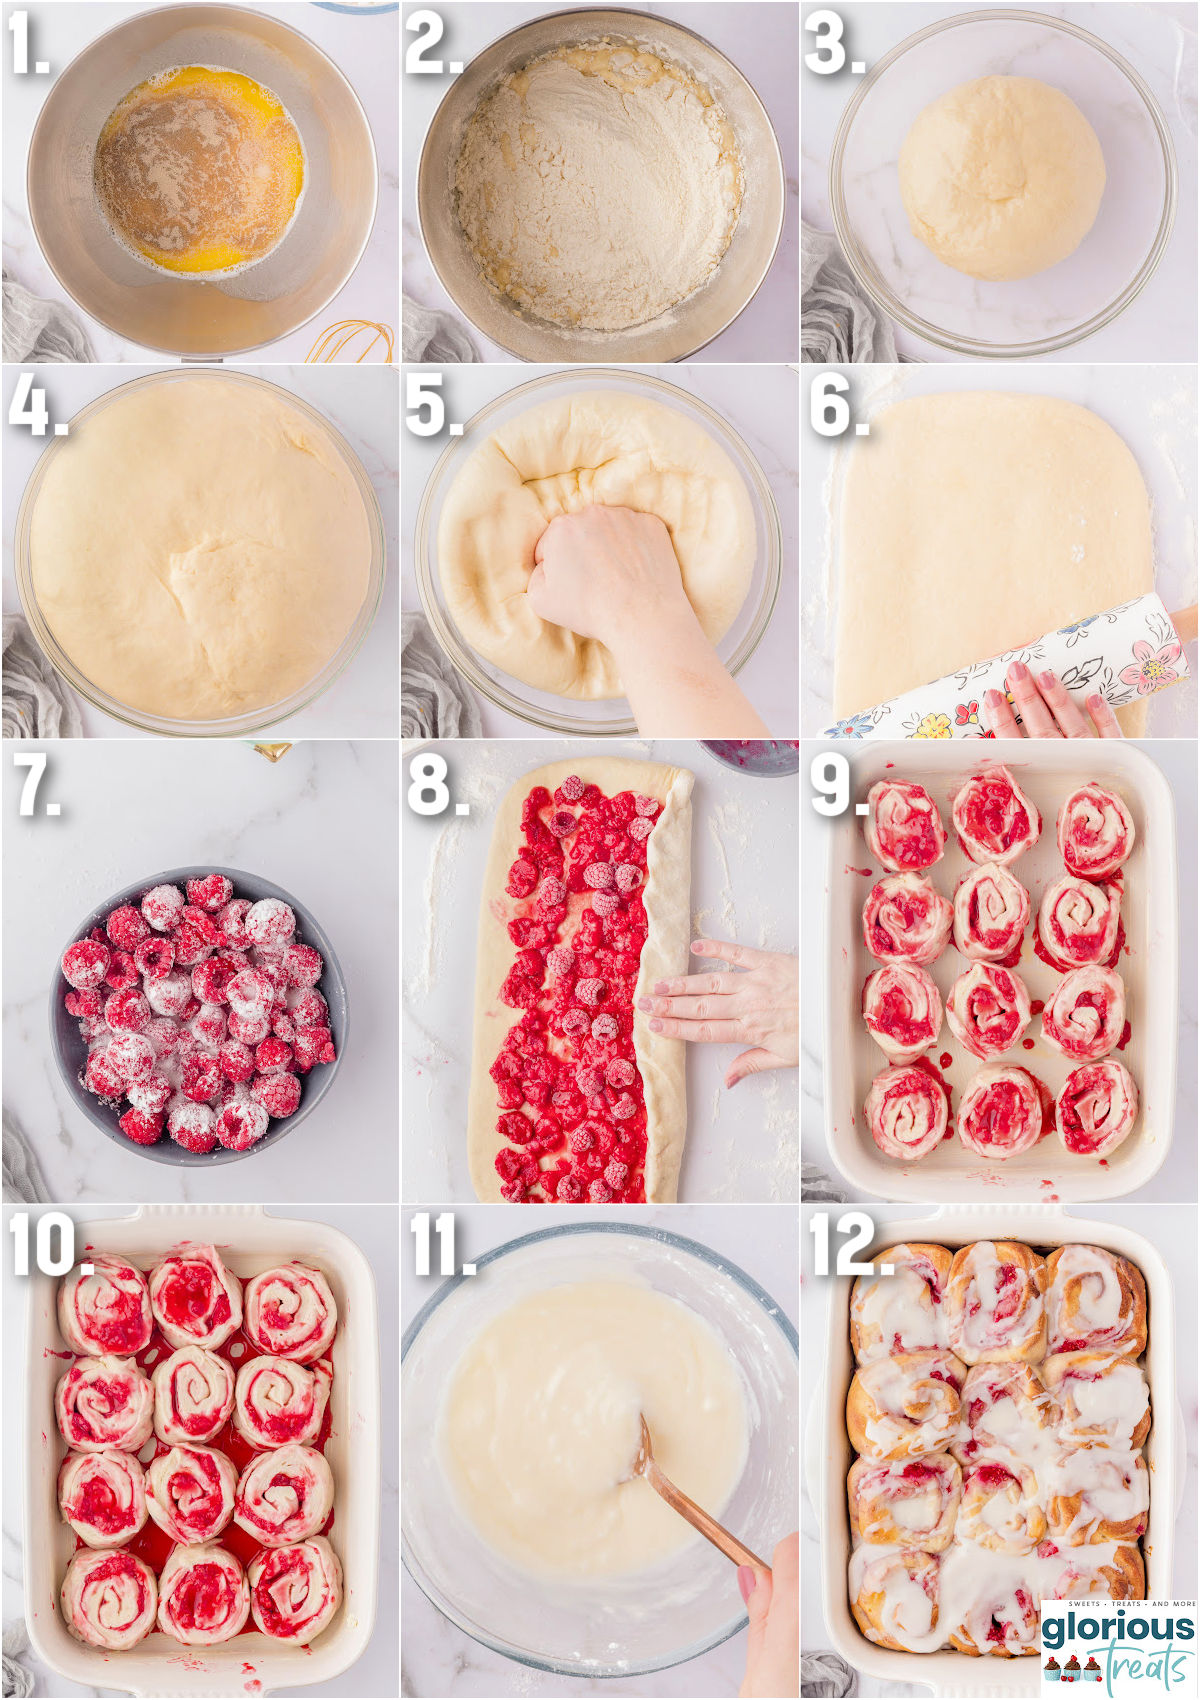 Twelve image collage showing how to make raspberry rolls step by step.